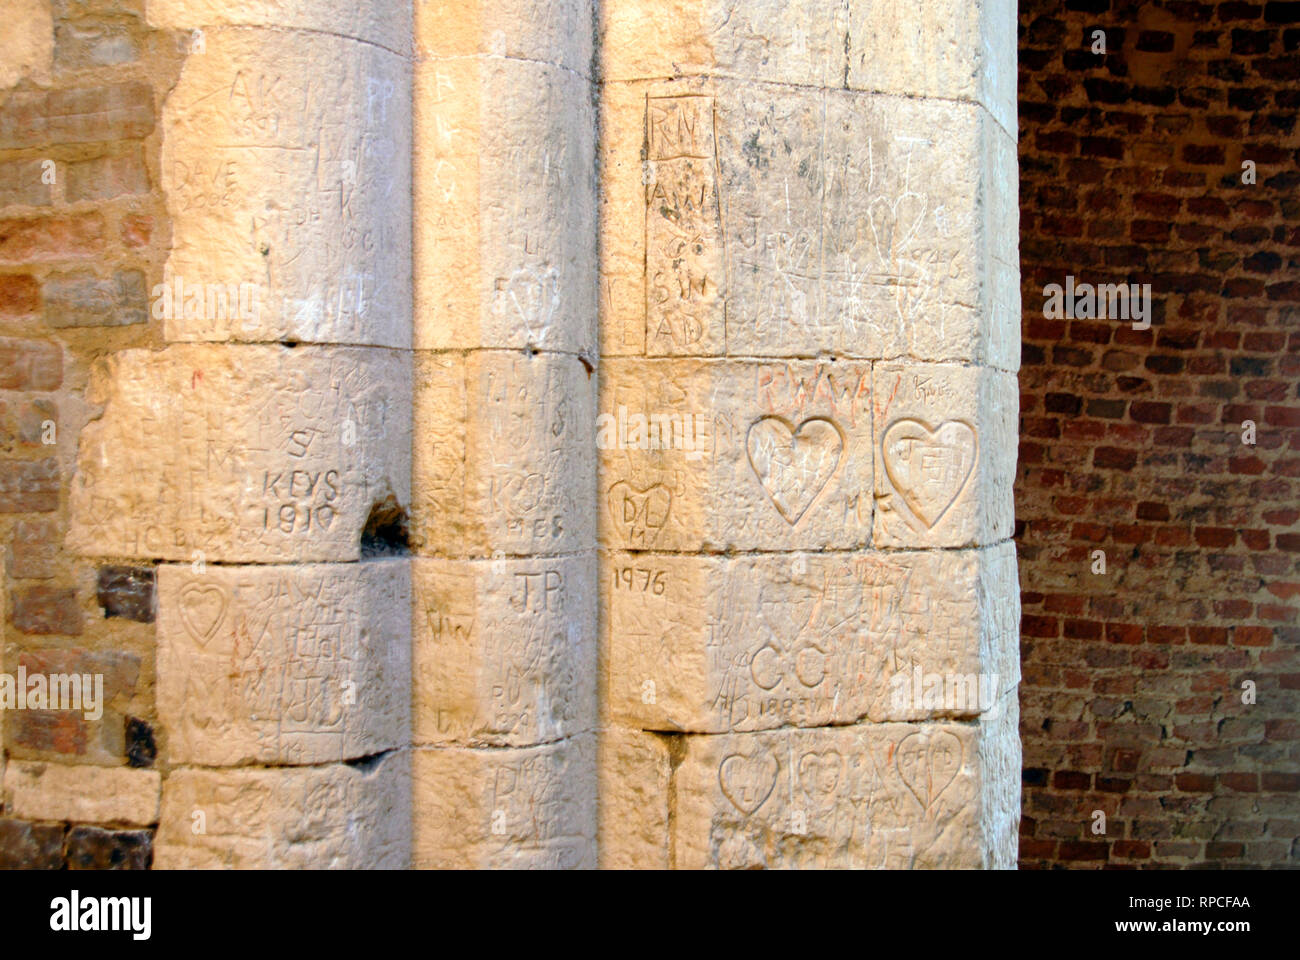 Various inscriptions carved into the ancient stonework of St Benet's Abbey, Norfolk, England. Stock Photo